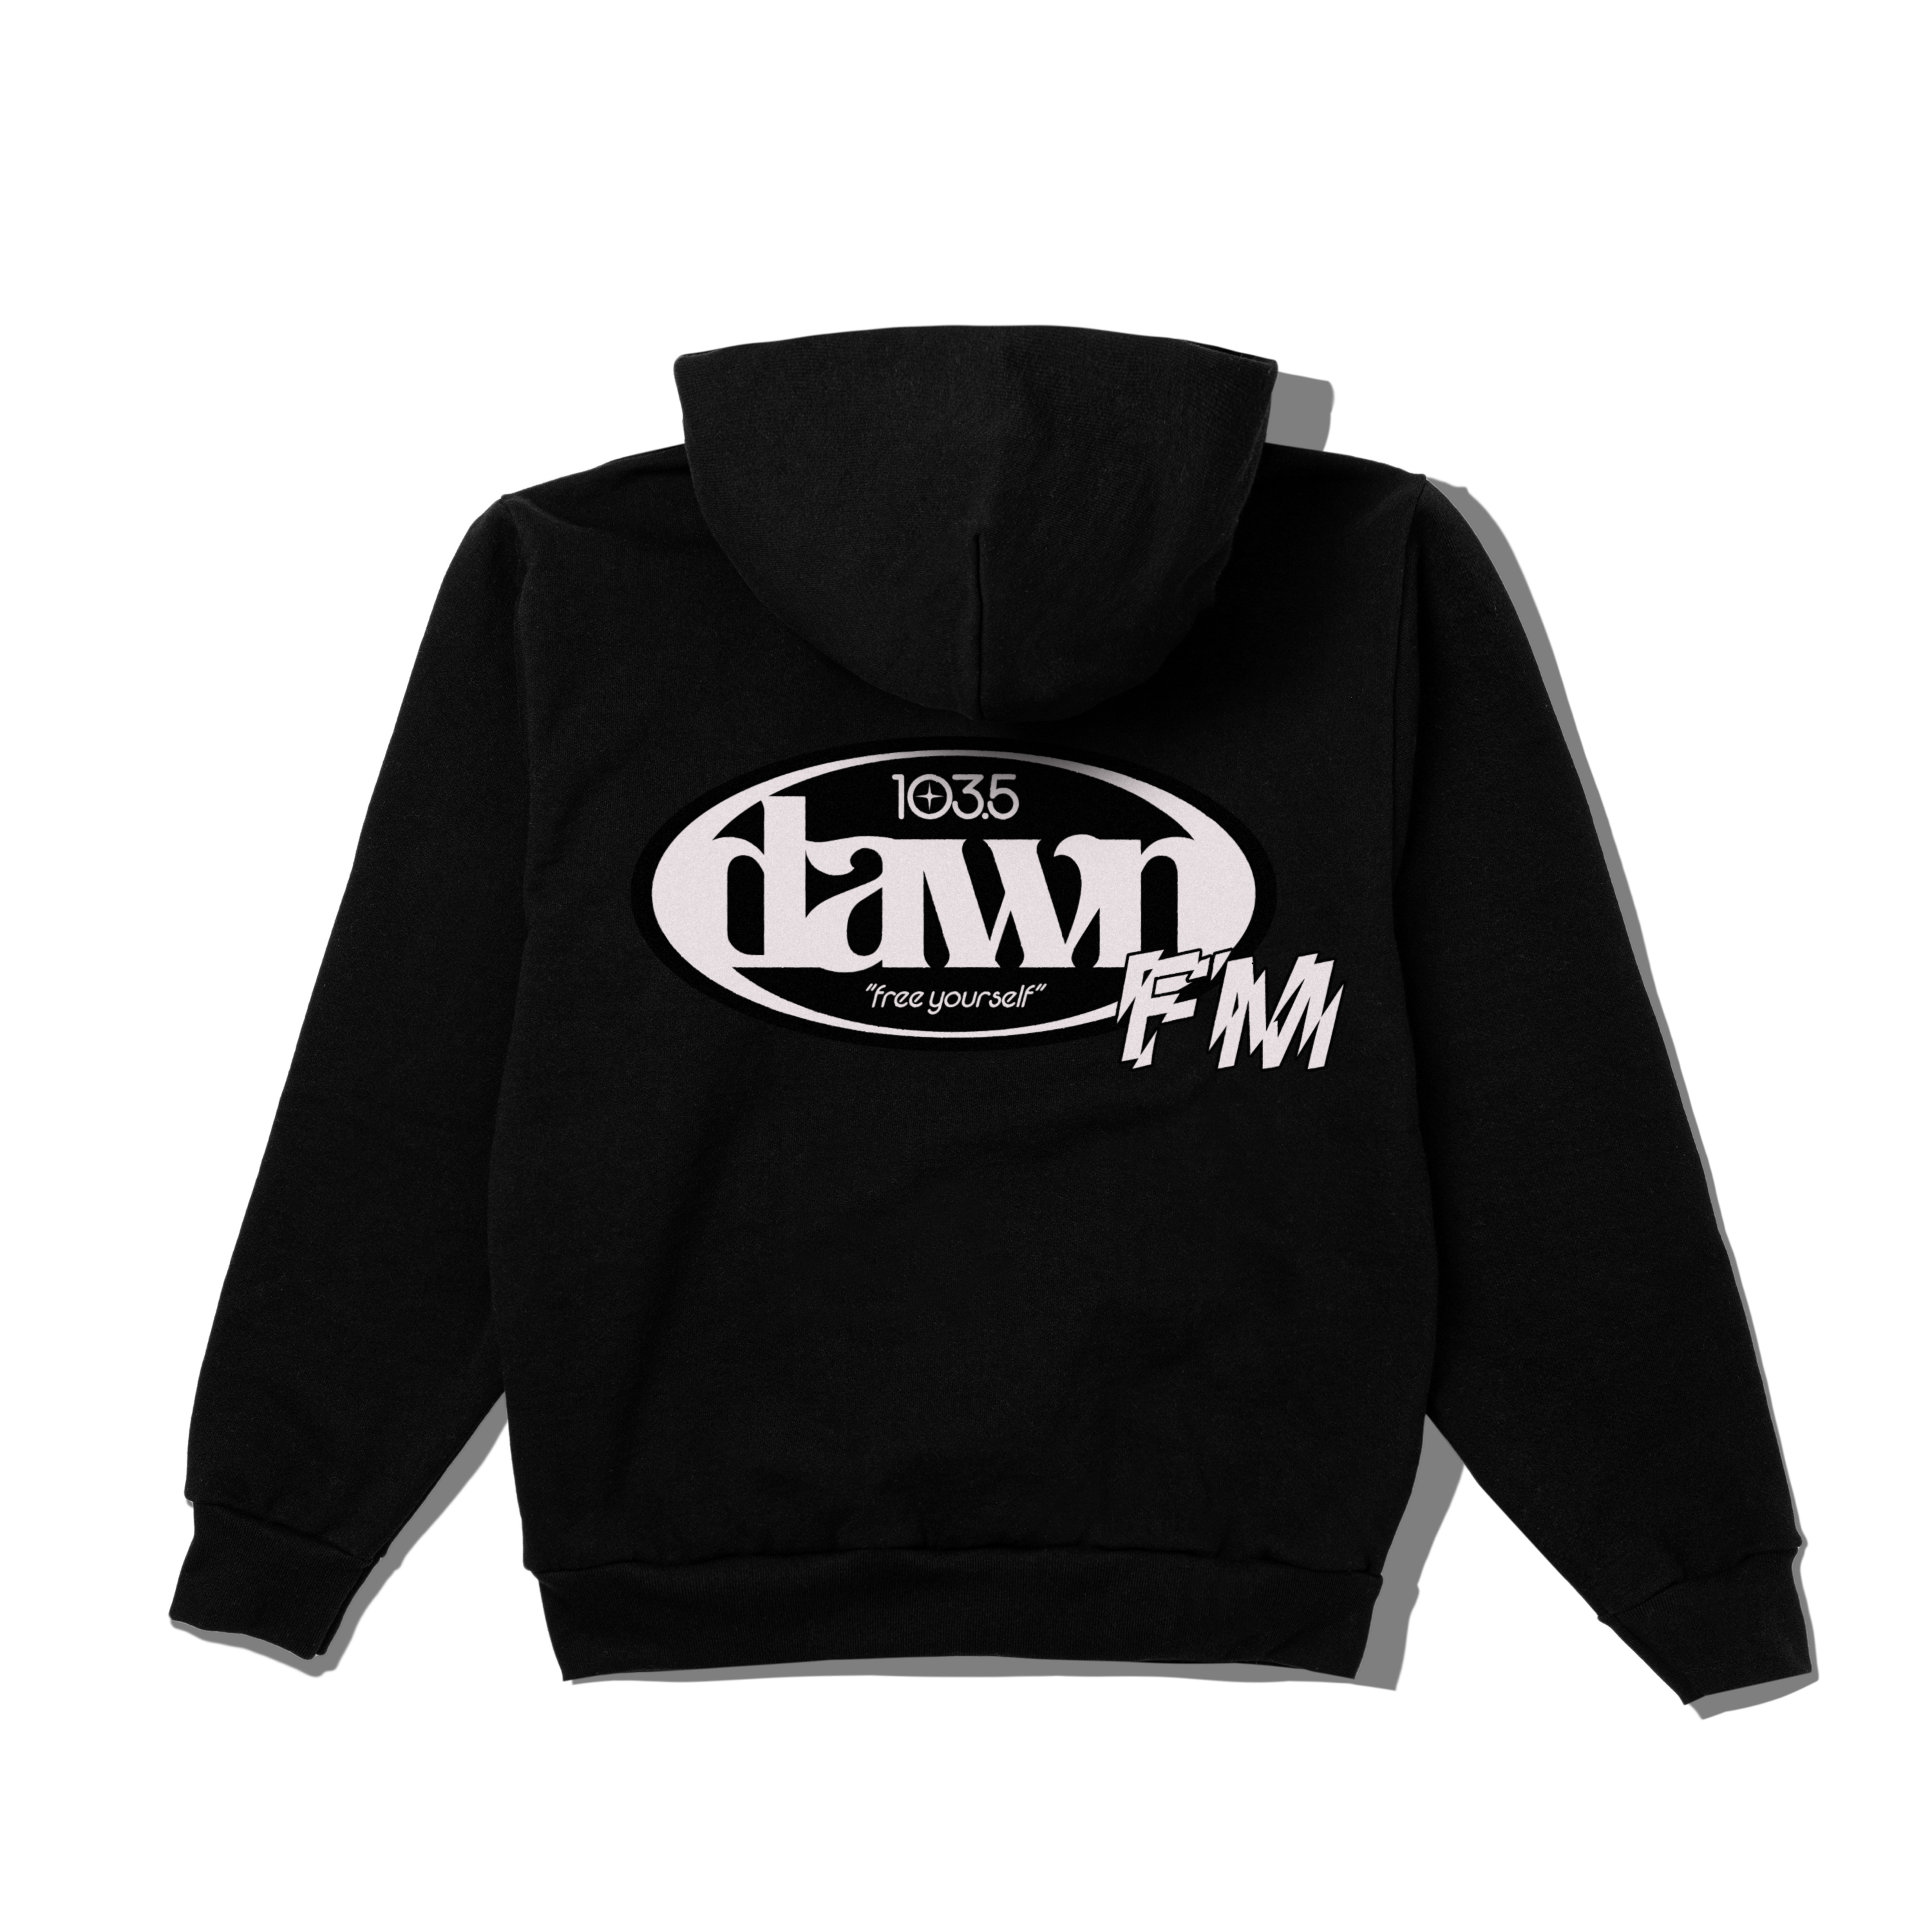 The Weeknd - Dawn Fm Free Yourself Pullover Hood Box Set